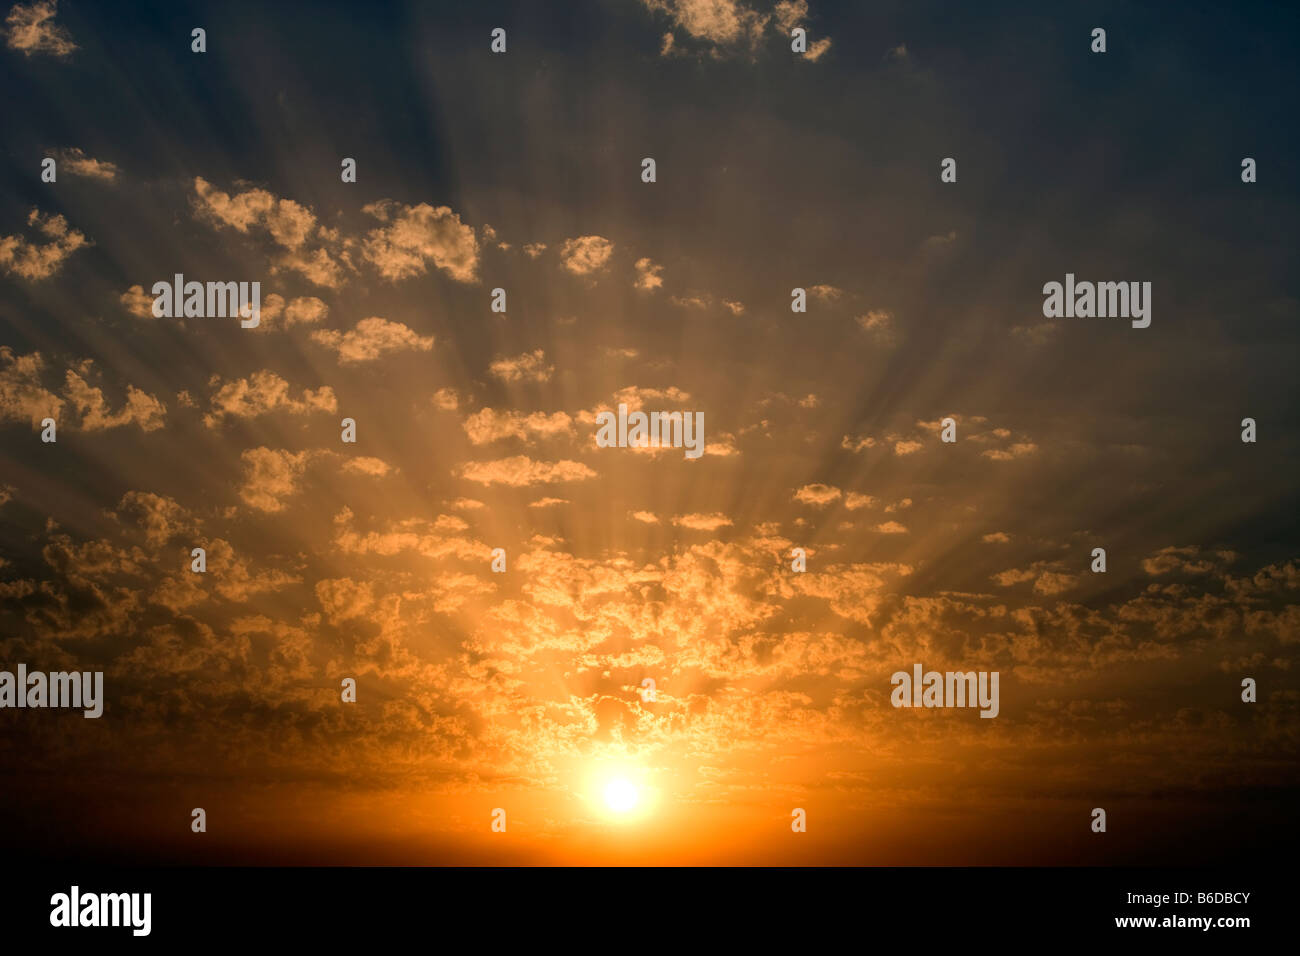 CLOUDSCAPE OF SUN LIGHT RAYS THROUGH BACKLIT PUFFY CLOUDS ON YELLOW SKY Stock Photo